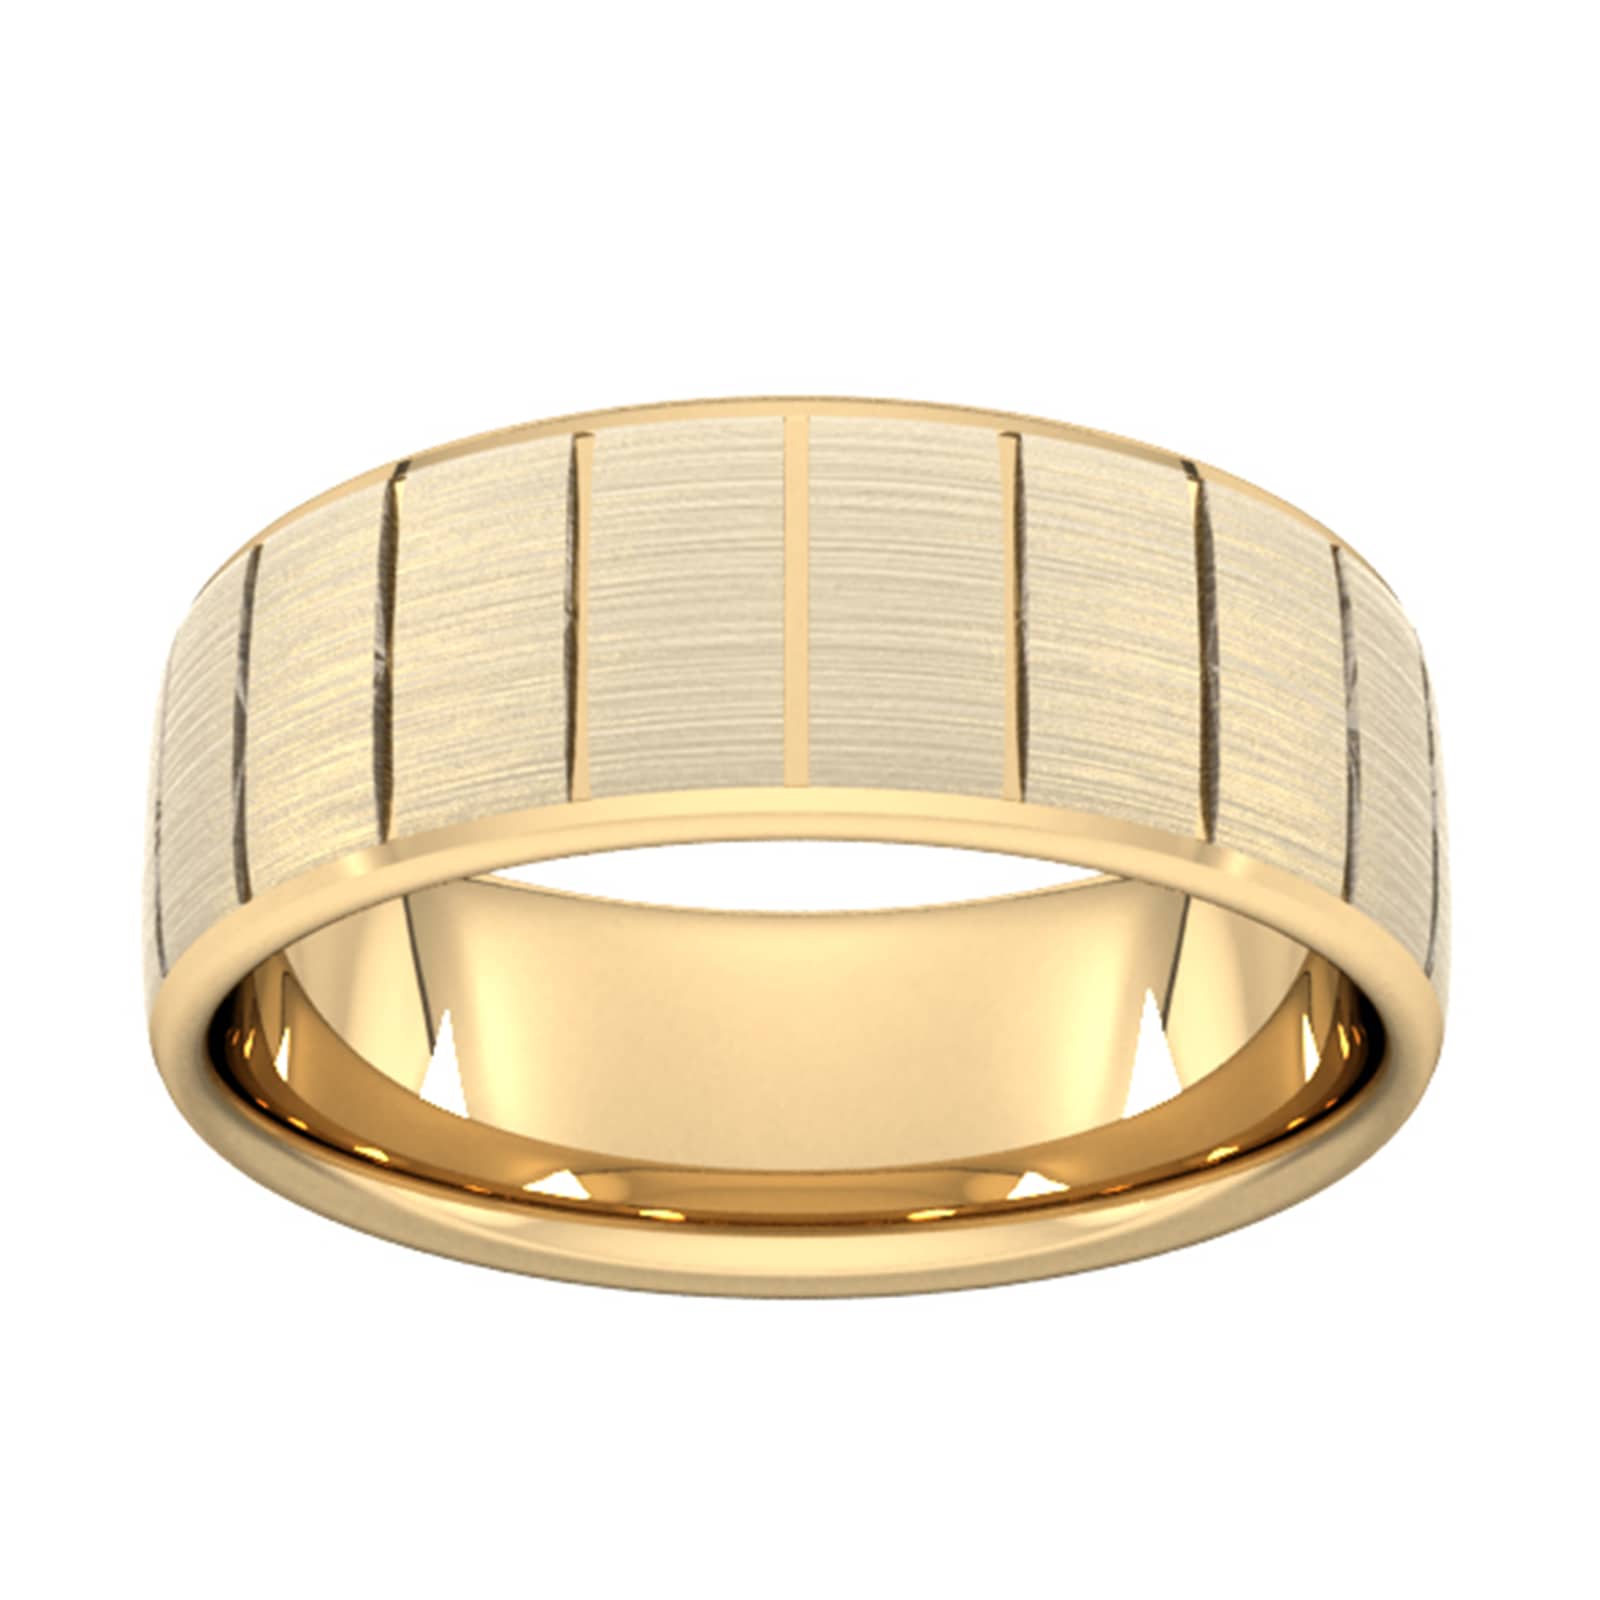 8mm Slight Court Heavy Vertical Lines Wedding Ring In 18 Carat Yellow Gold - Ring Size I